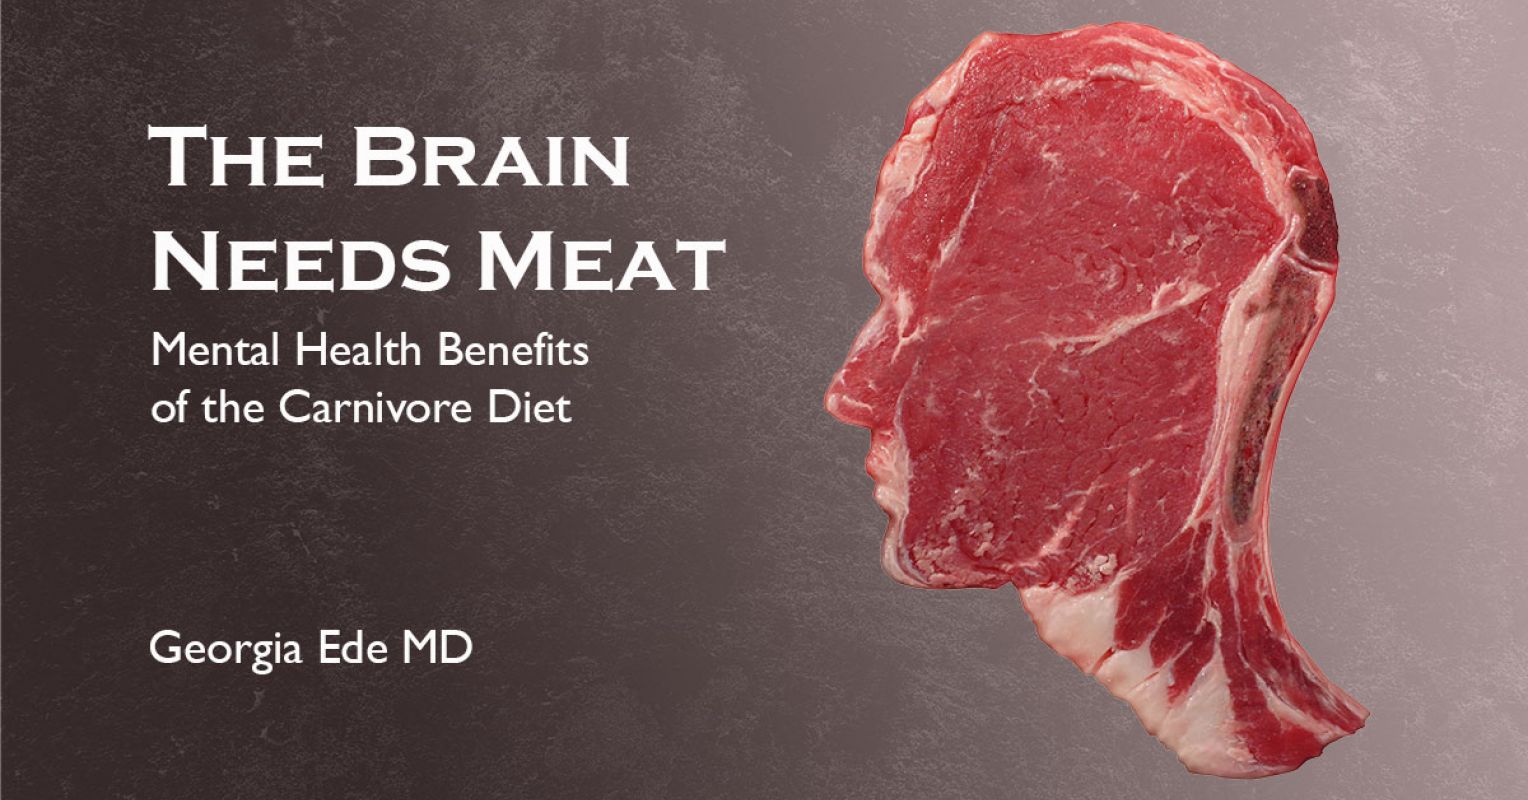 the_brain_needs_meat_-_meat_head.jpg?ito